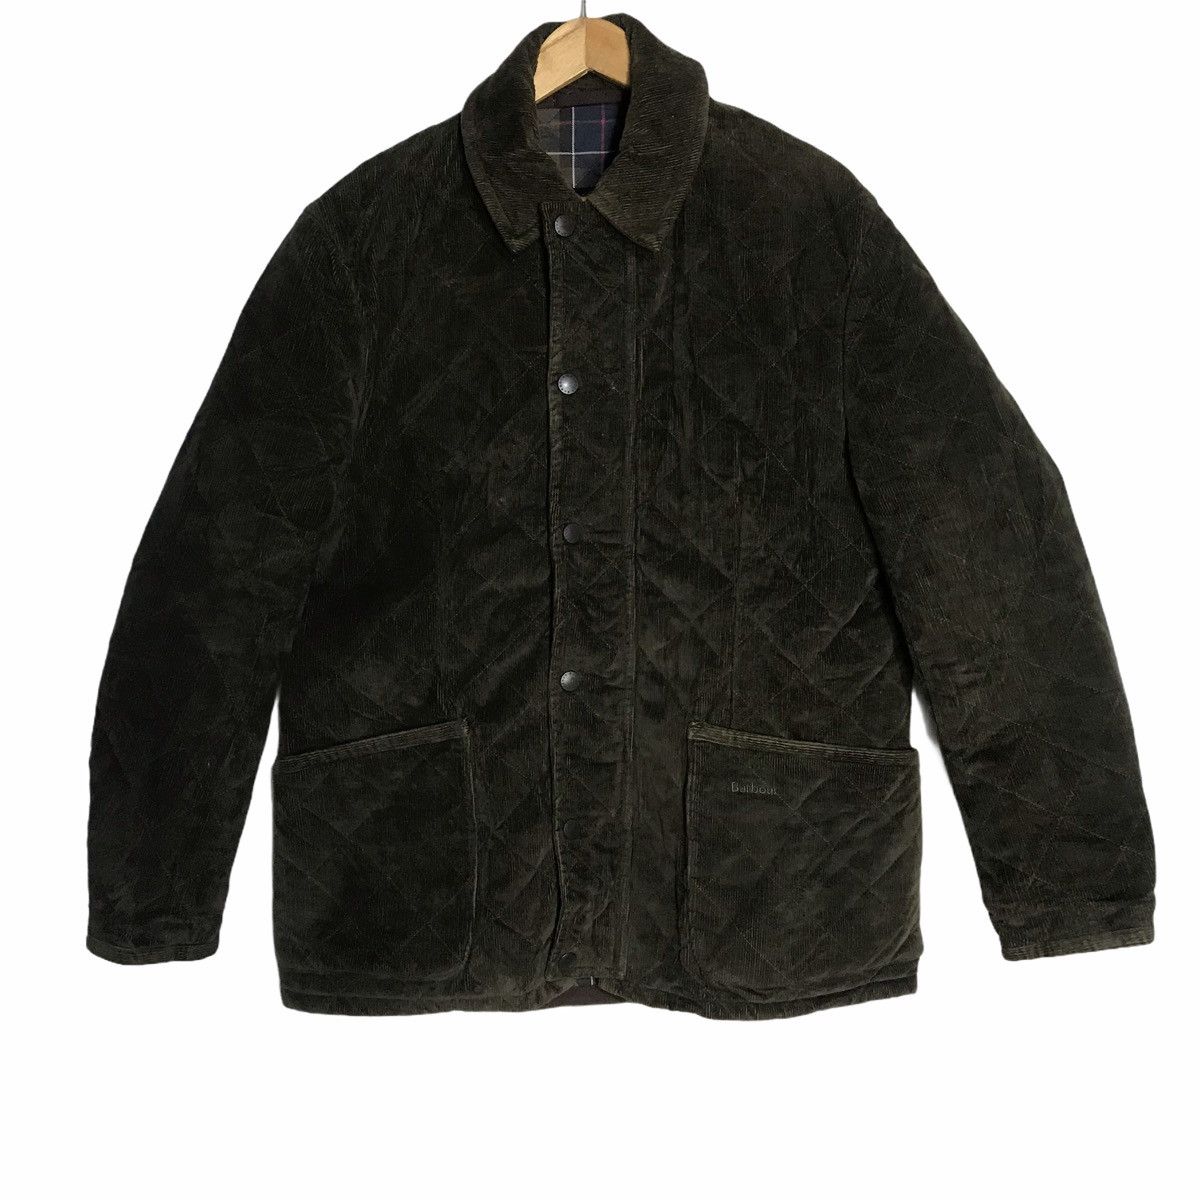 Barbour fine corduroy quilted jacket - 1